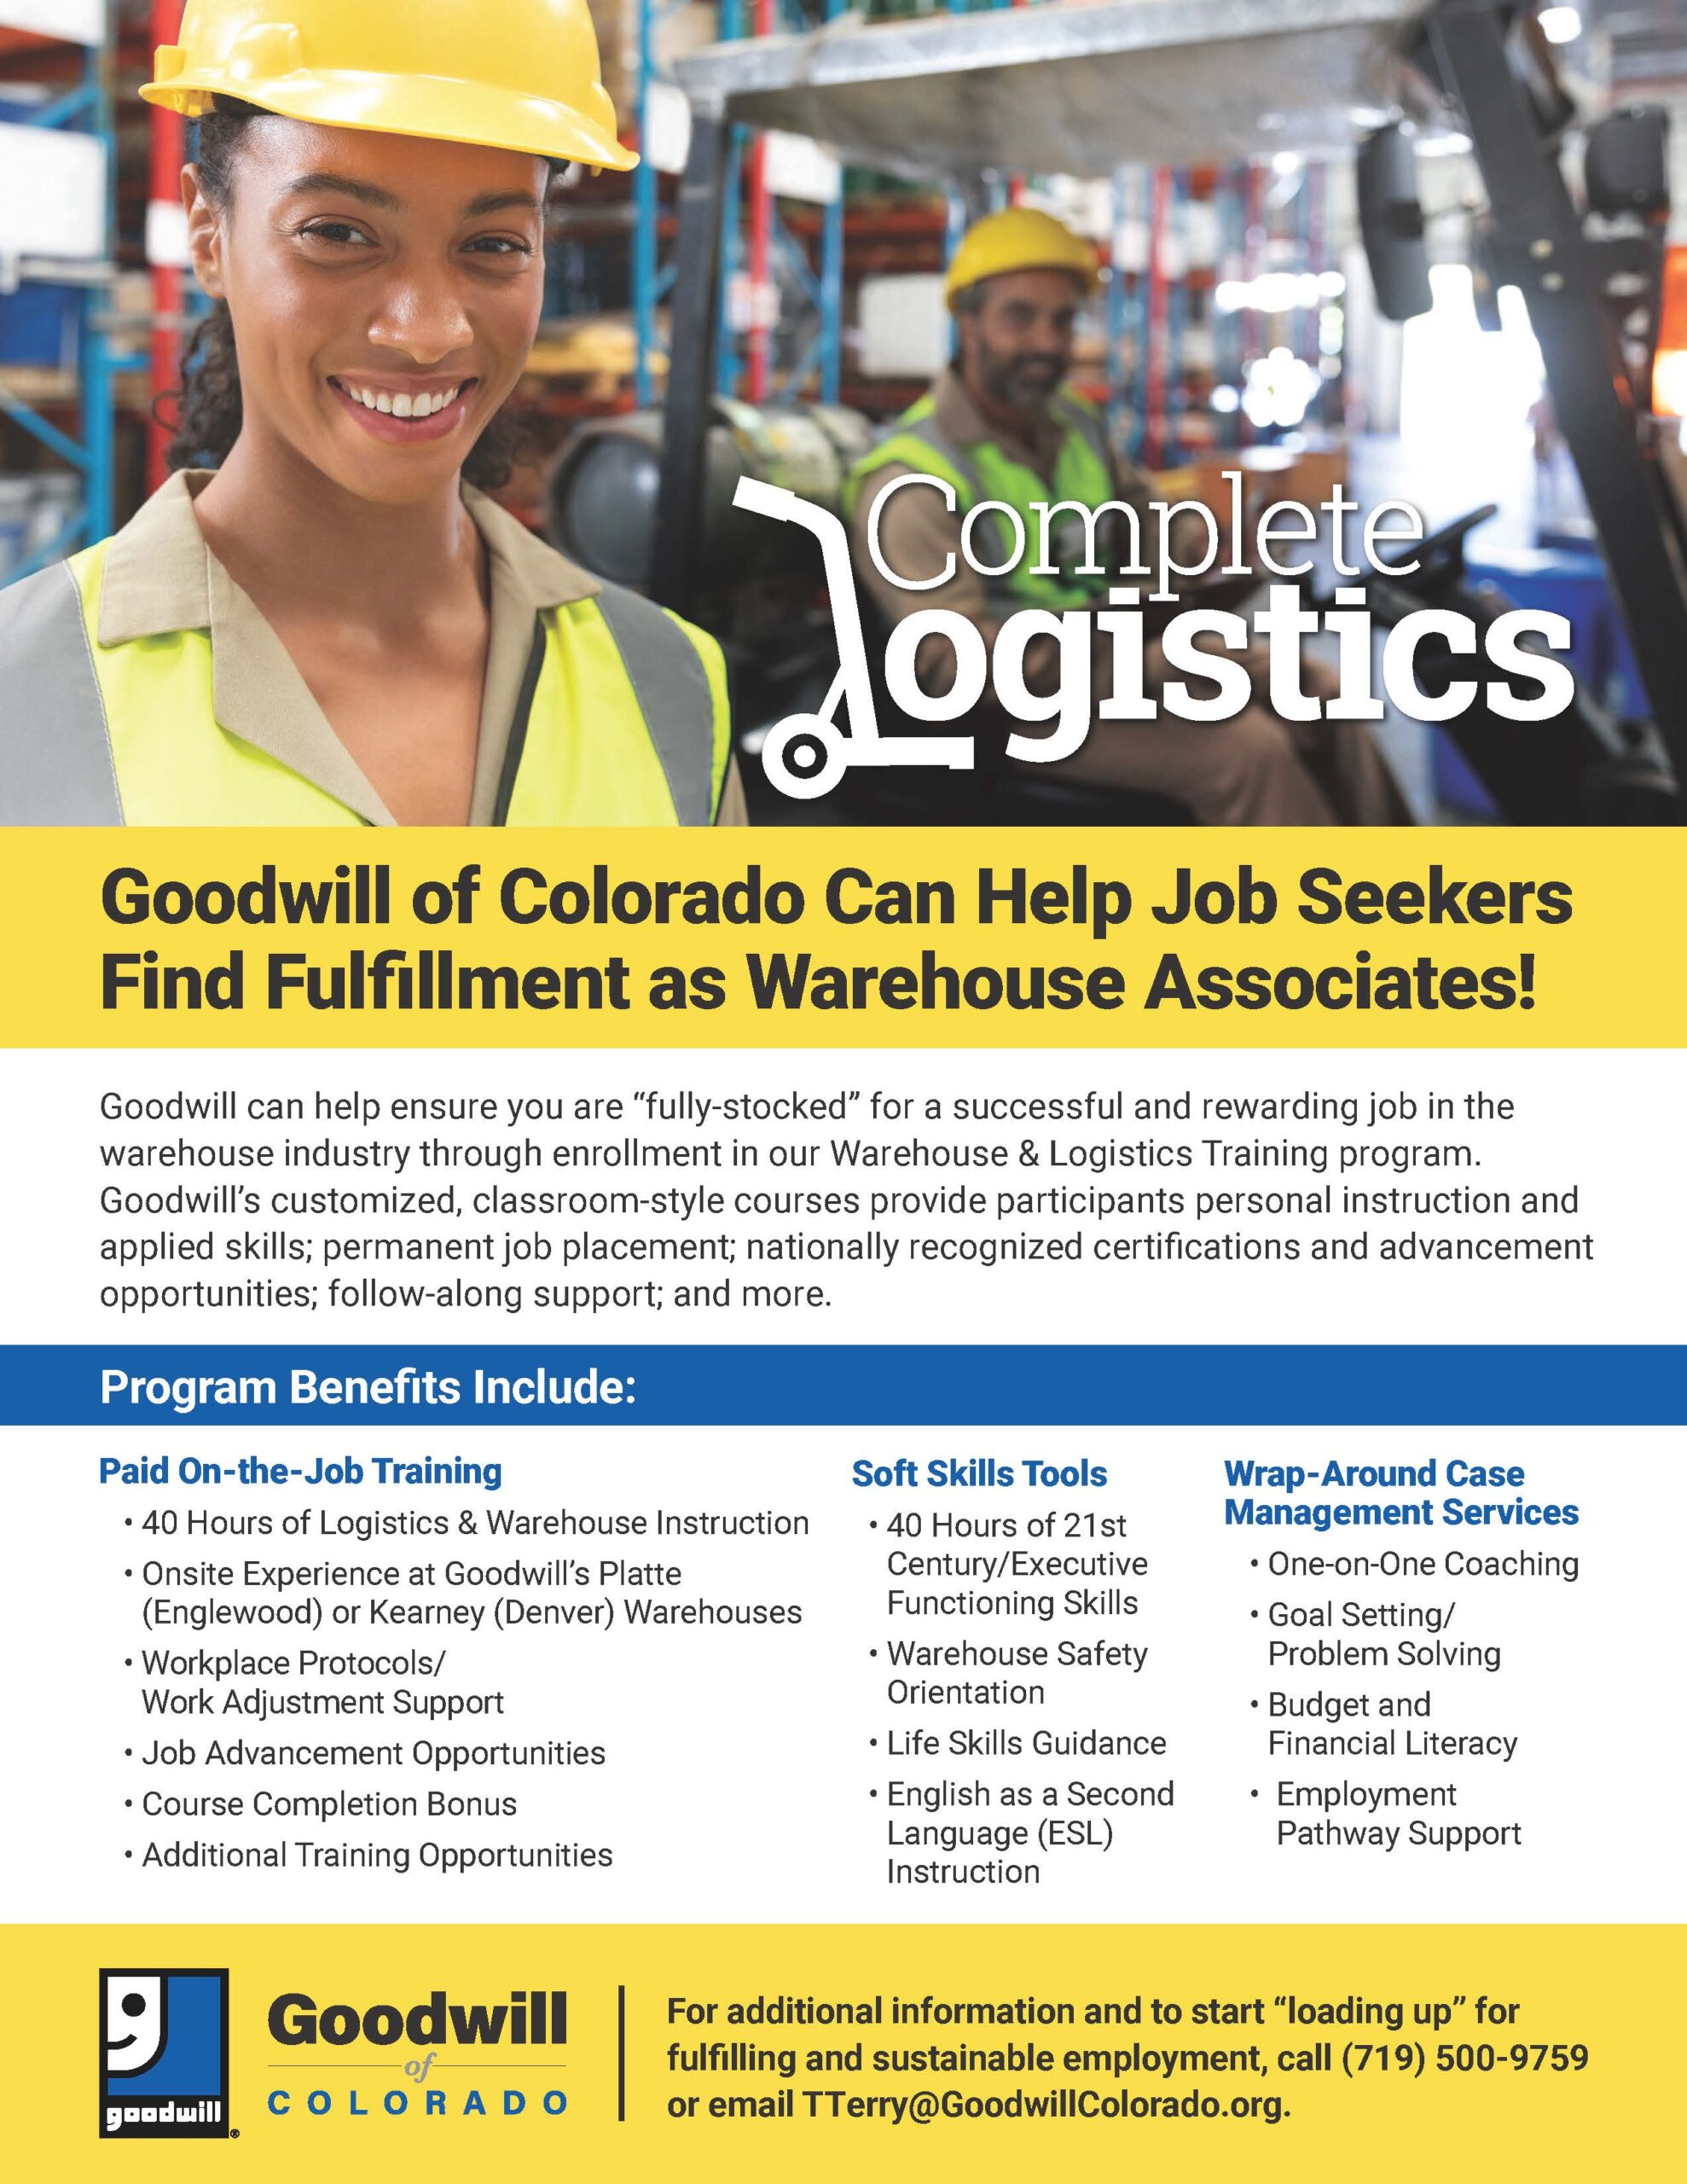 Goodwill of Colorado is looking to fulfill warehouse associate position